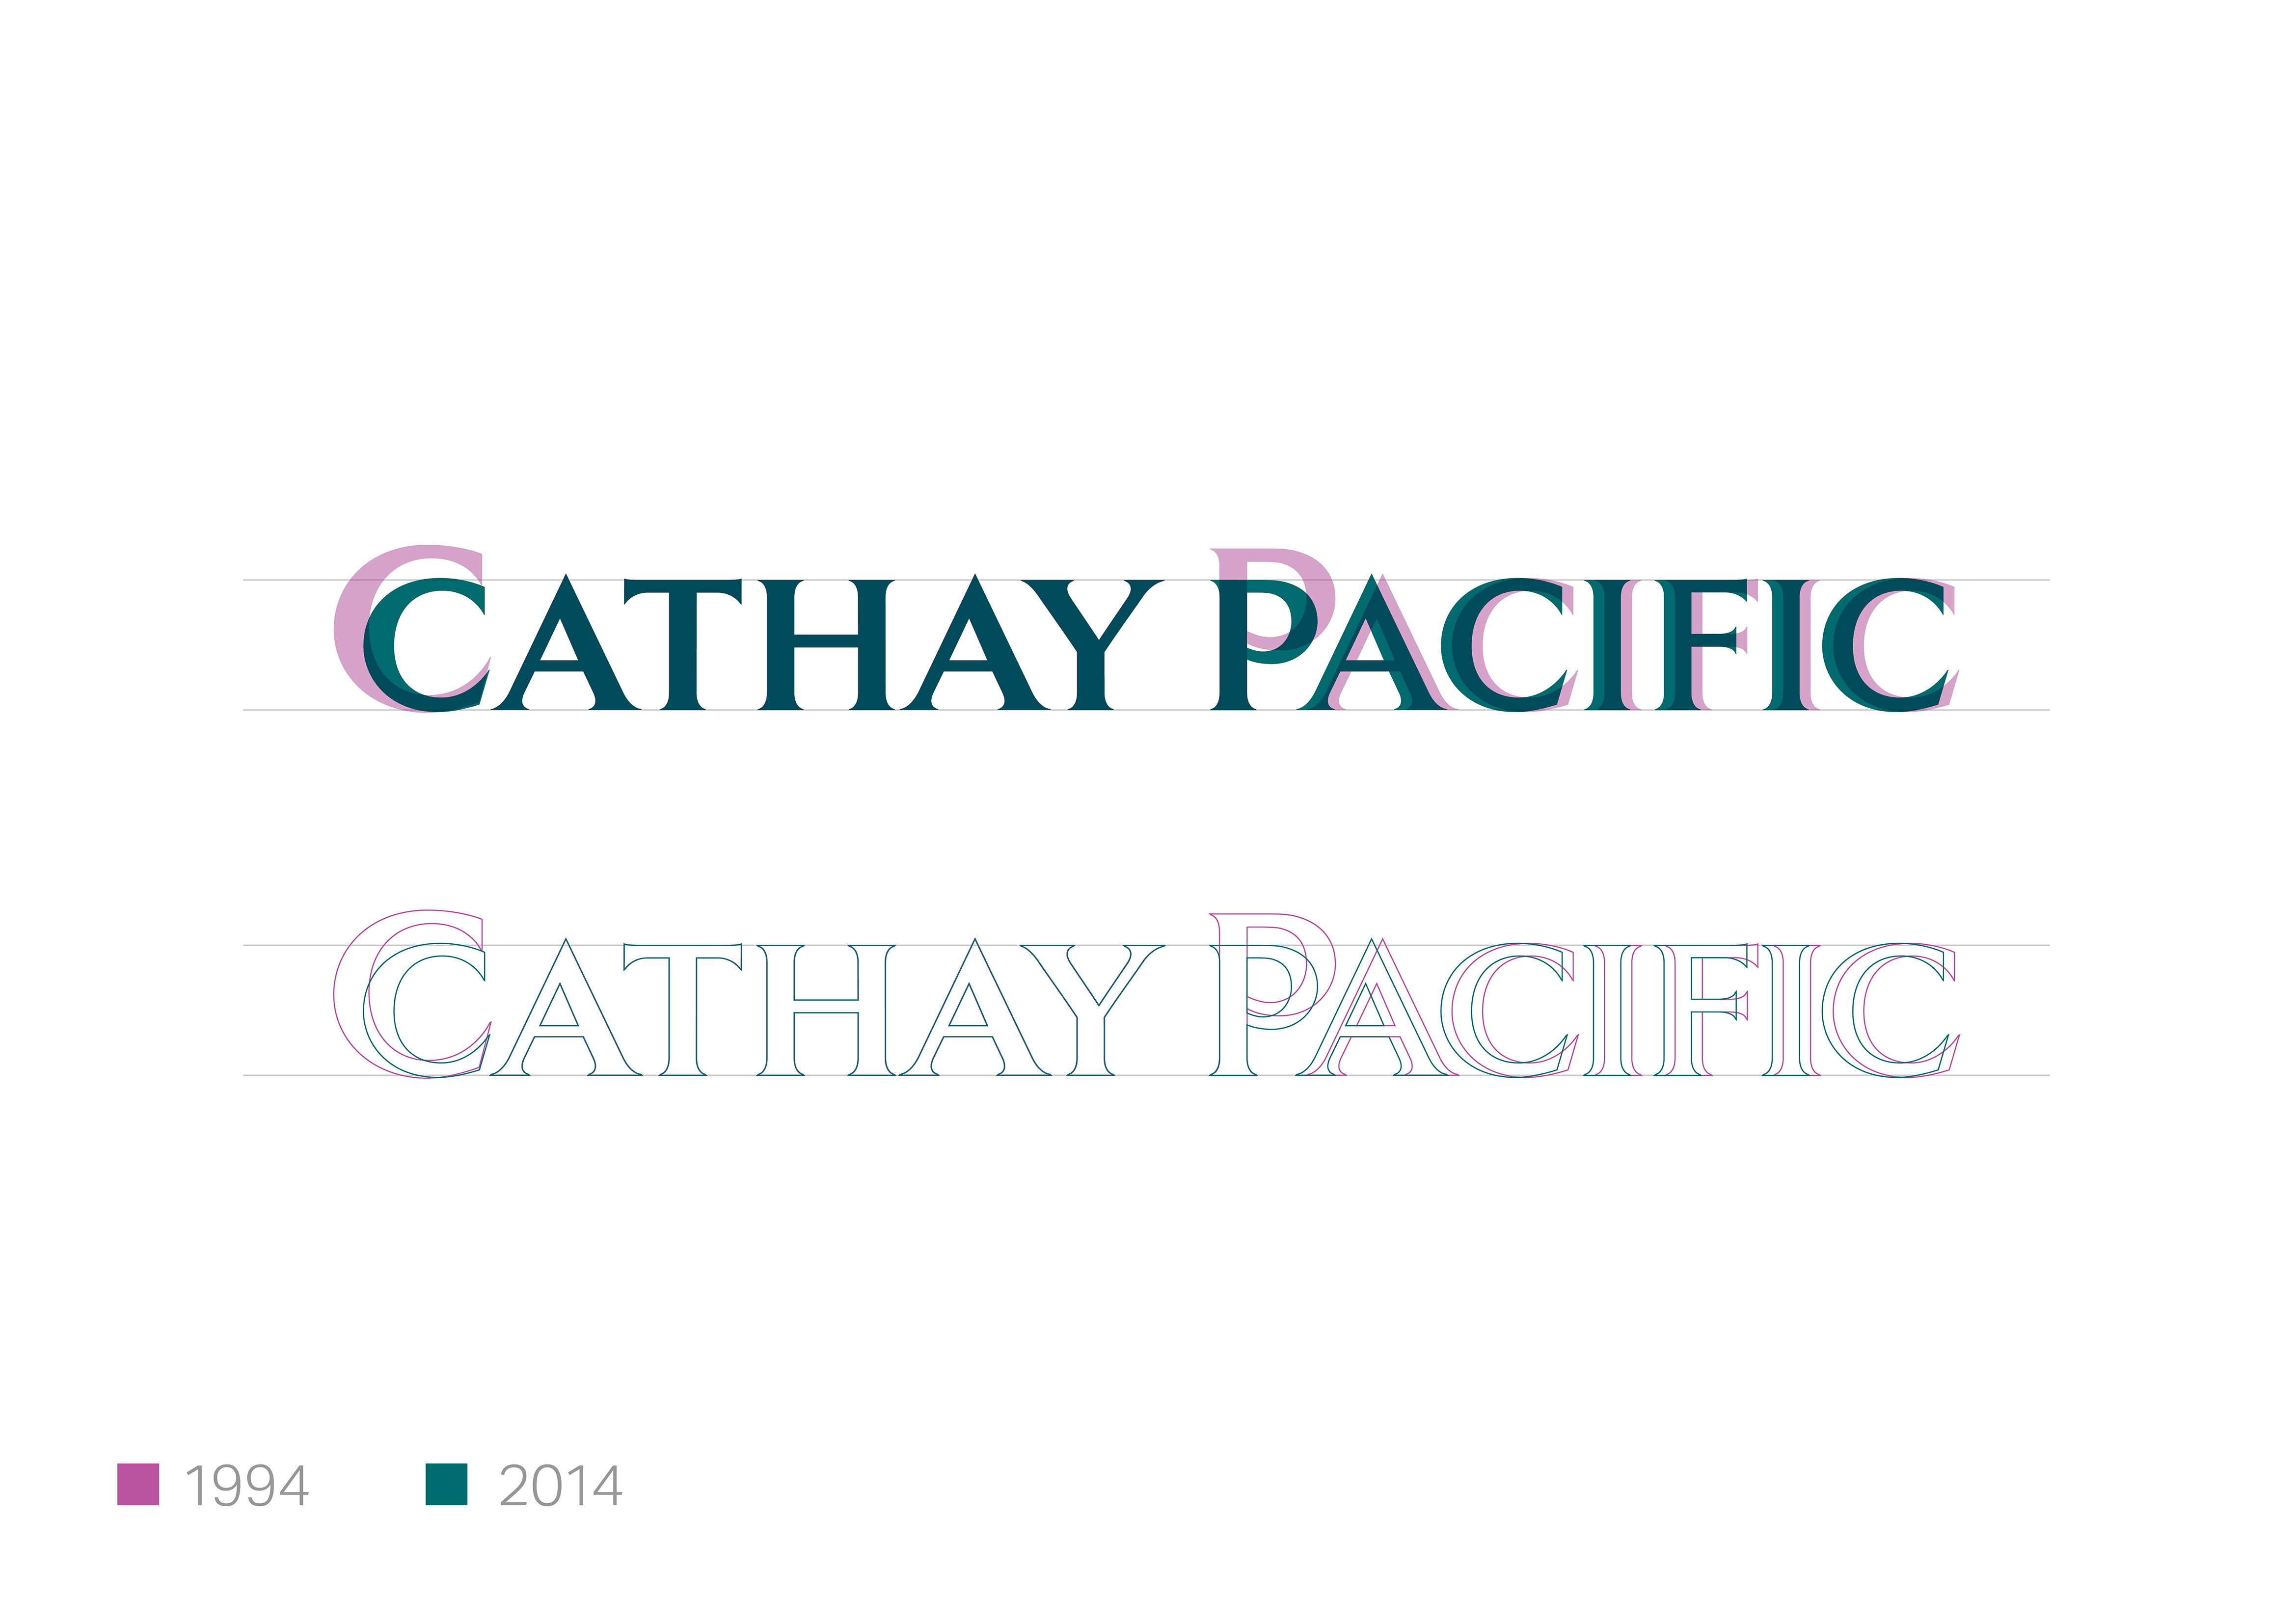 Cathay_Pacific_Typeface_Evolution.jpg